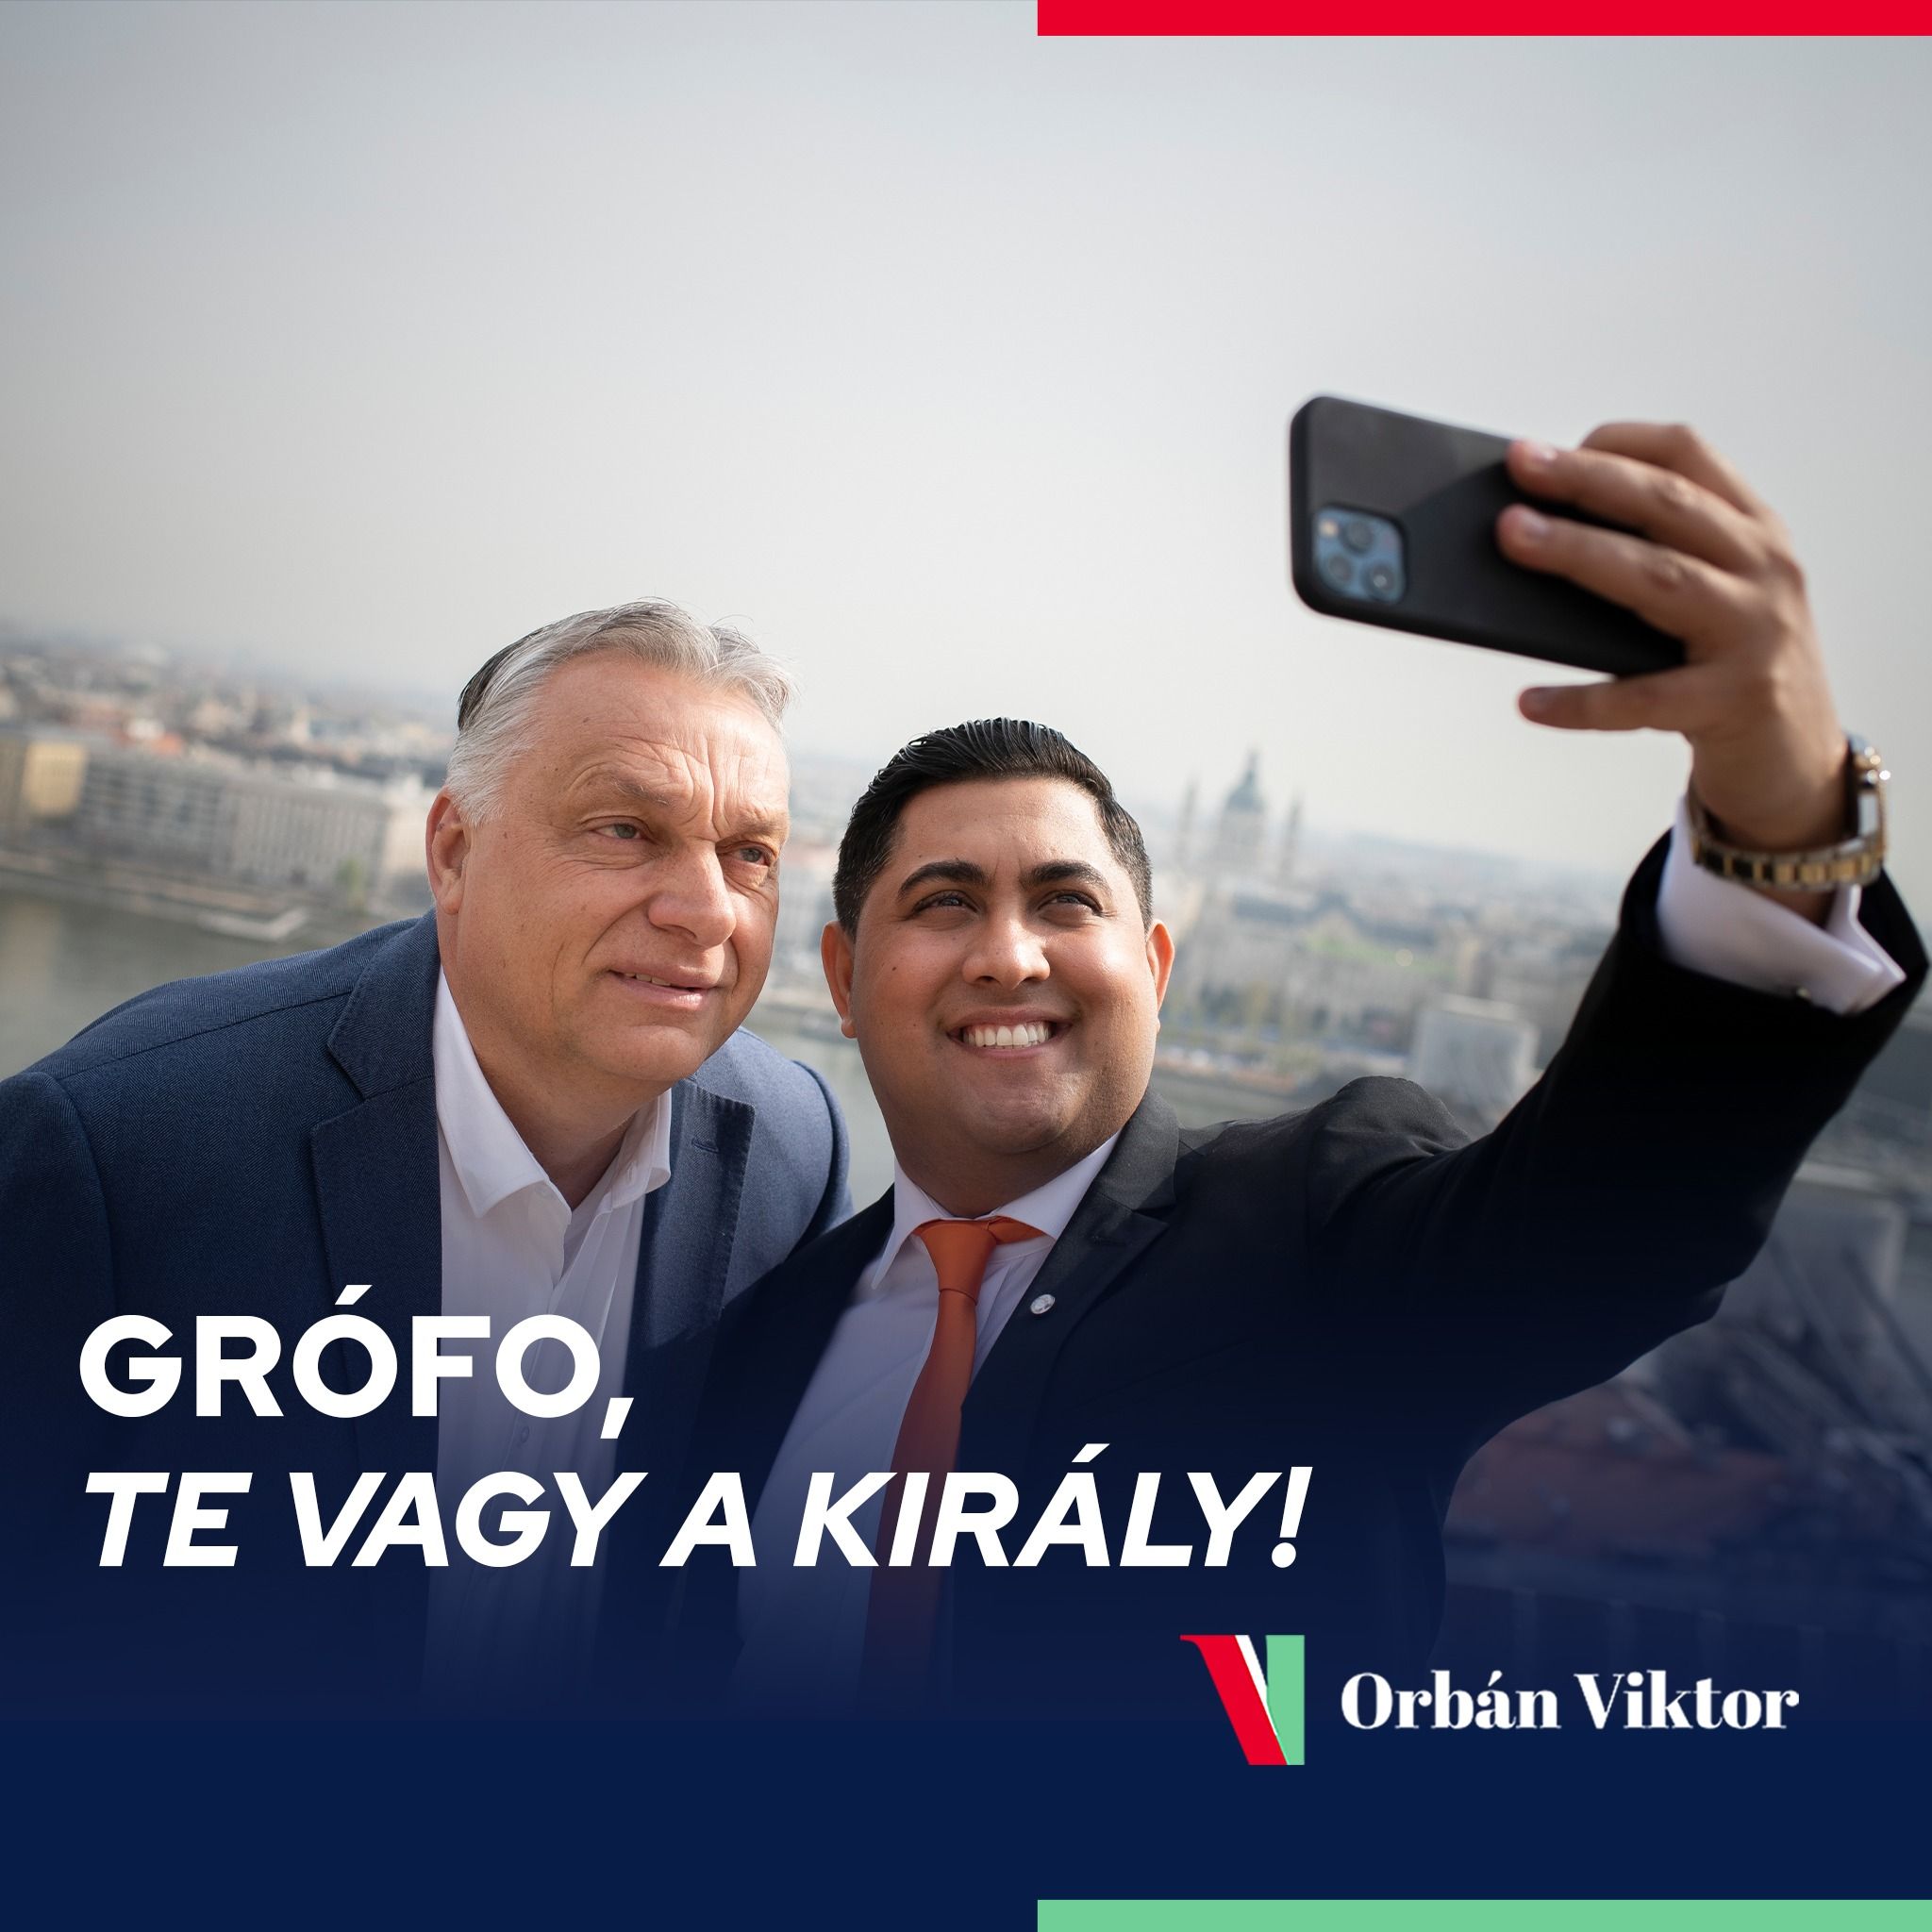 This is an exaggeration even from Orbán: he greeted Count Kis Grófo with an official certificate - photo